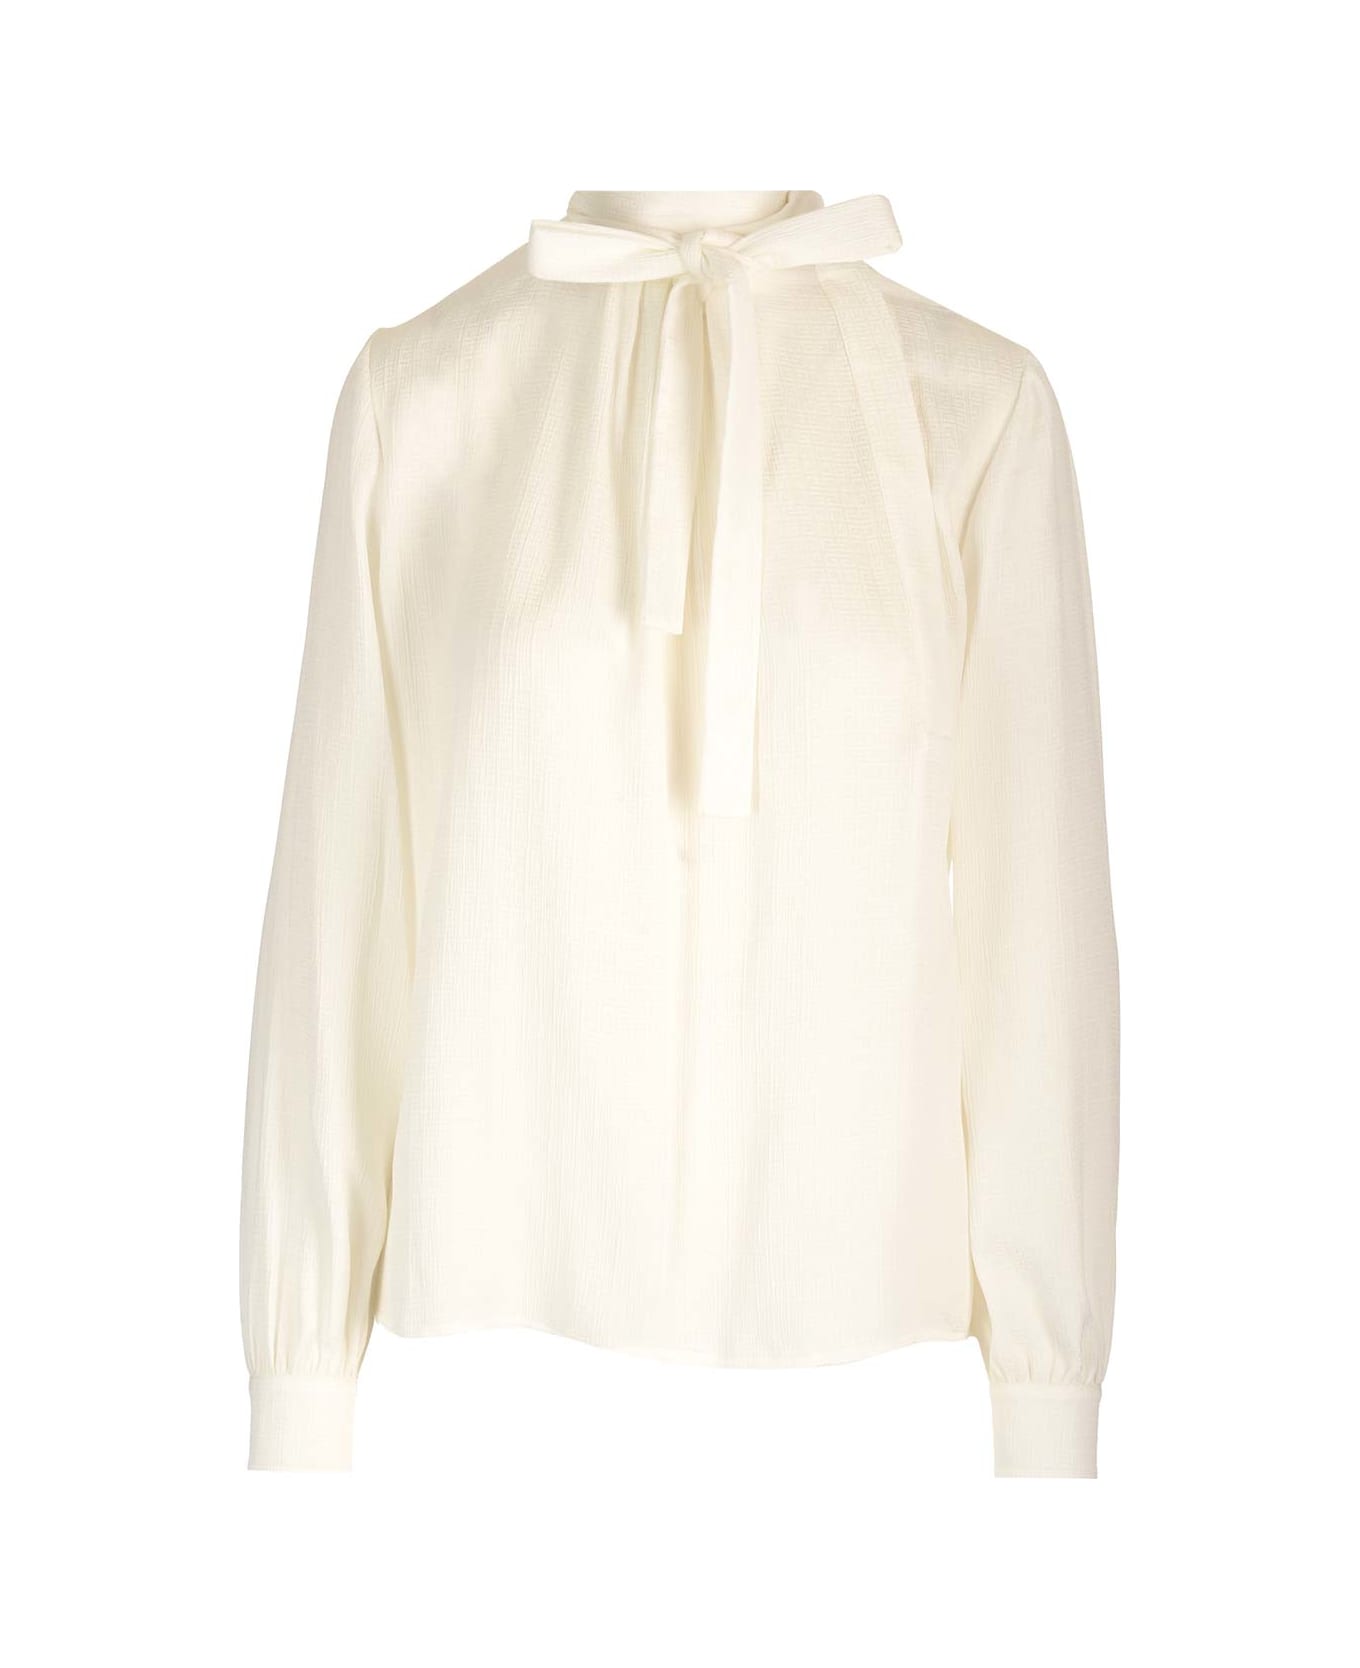 Givenchy Silk Shirt With Lavallière Collar - White ブラウス